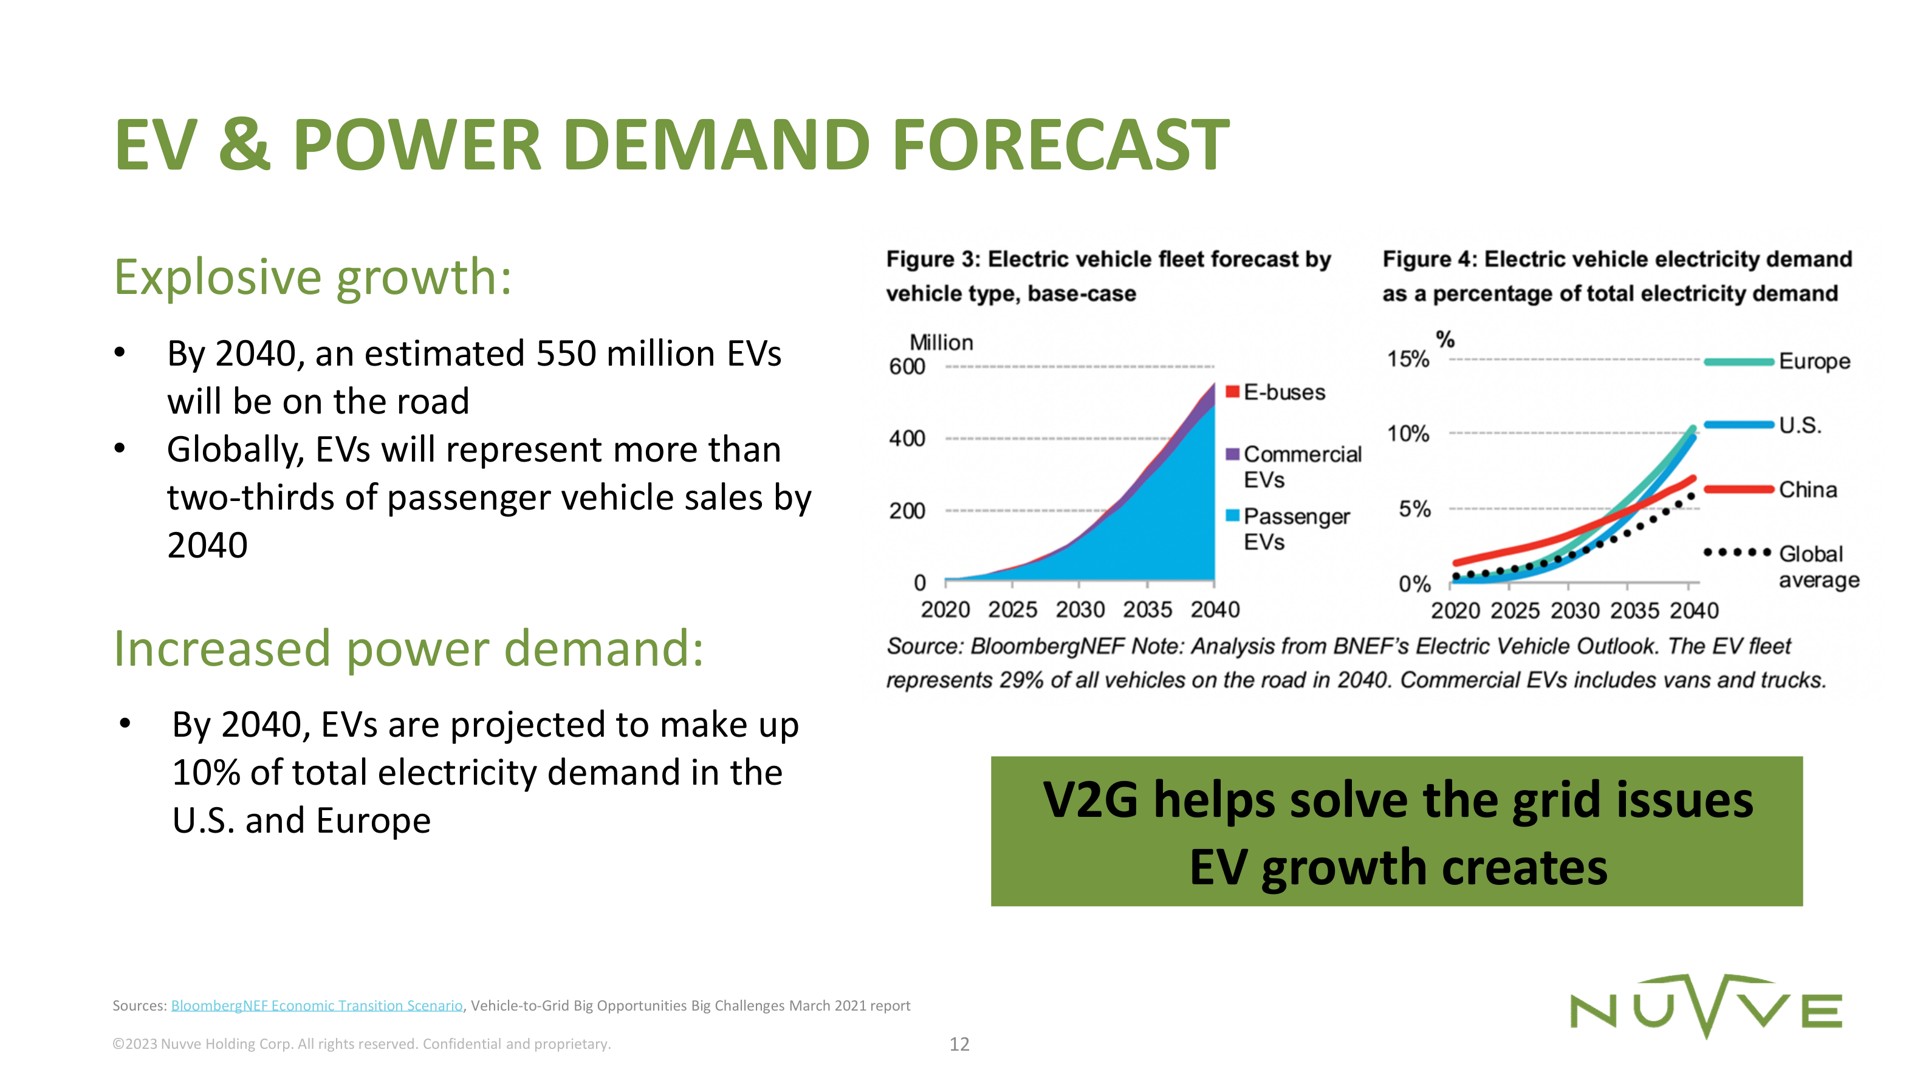 power demand forecast explosive growth increased power demand helps solve the grid issues growth creates | Nuvve